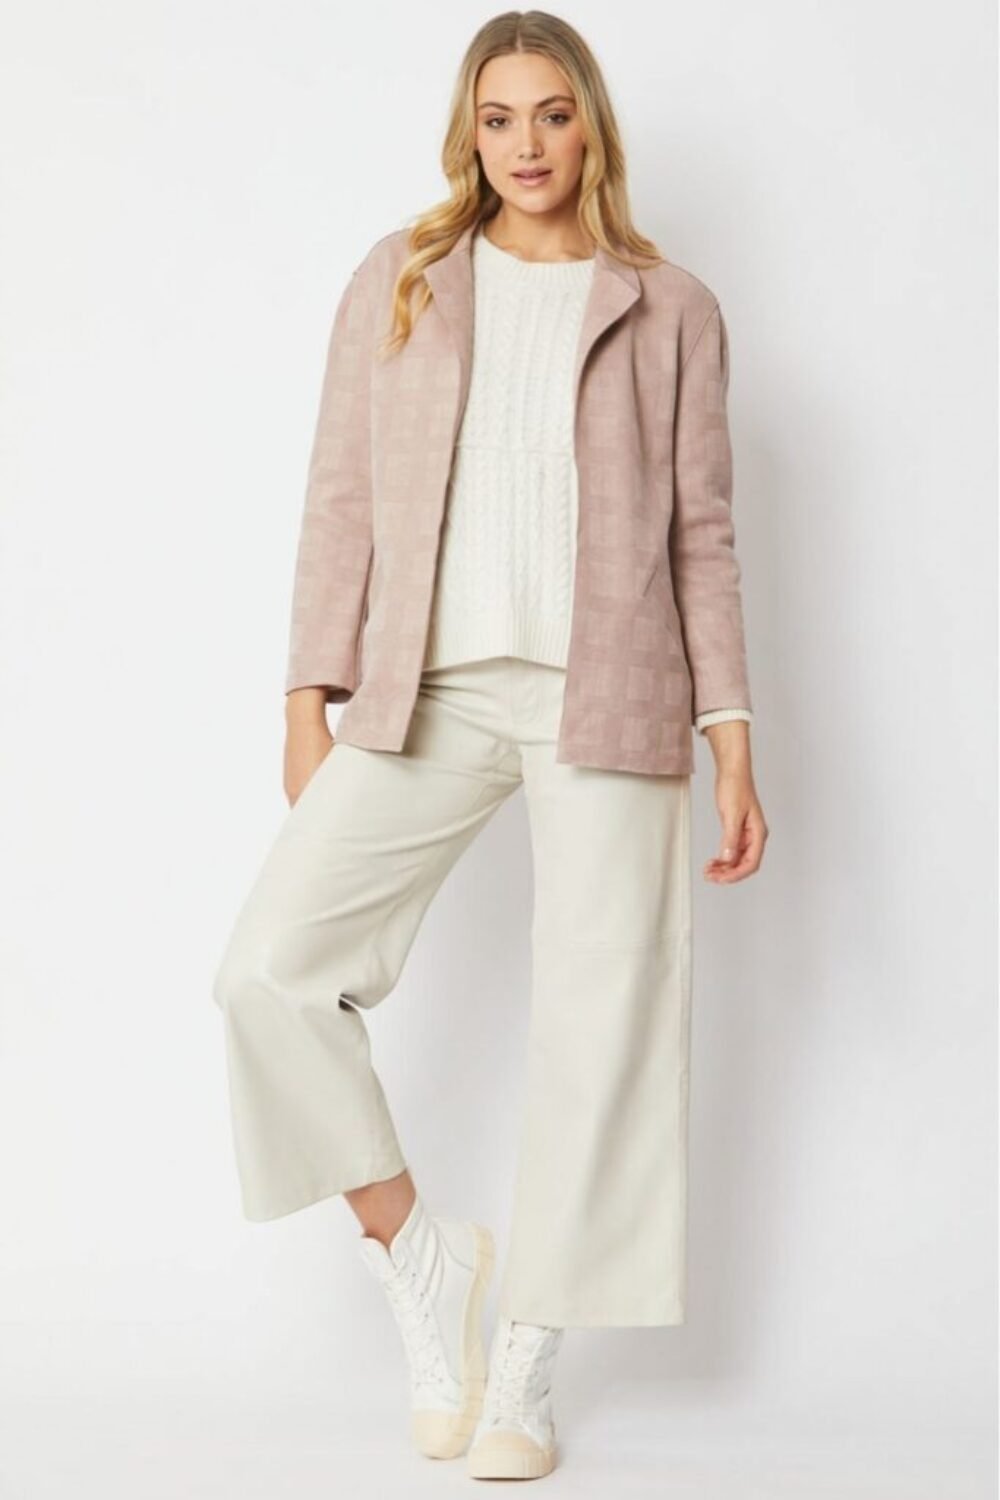 Shop Lux Pink Faux Suede Checked Jacket and women's luxury and designer clothes at www.lux-apparel.co.uk